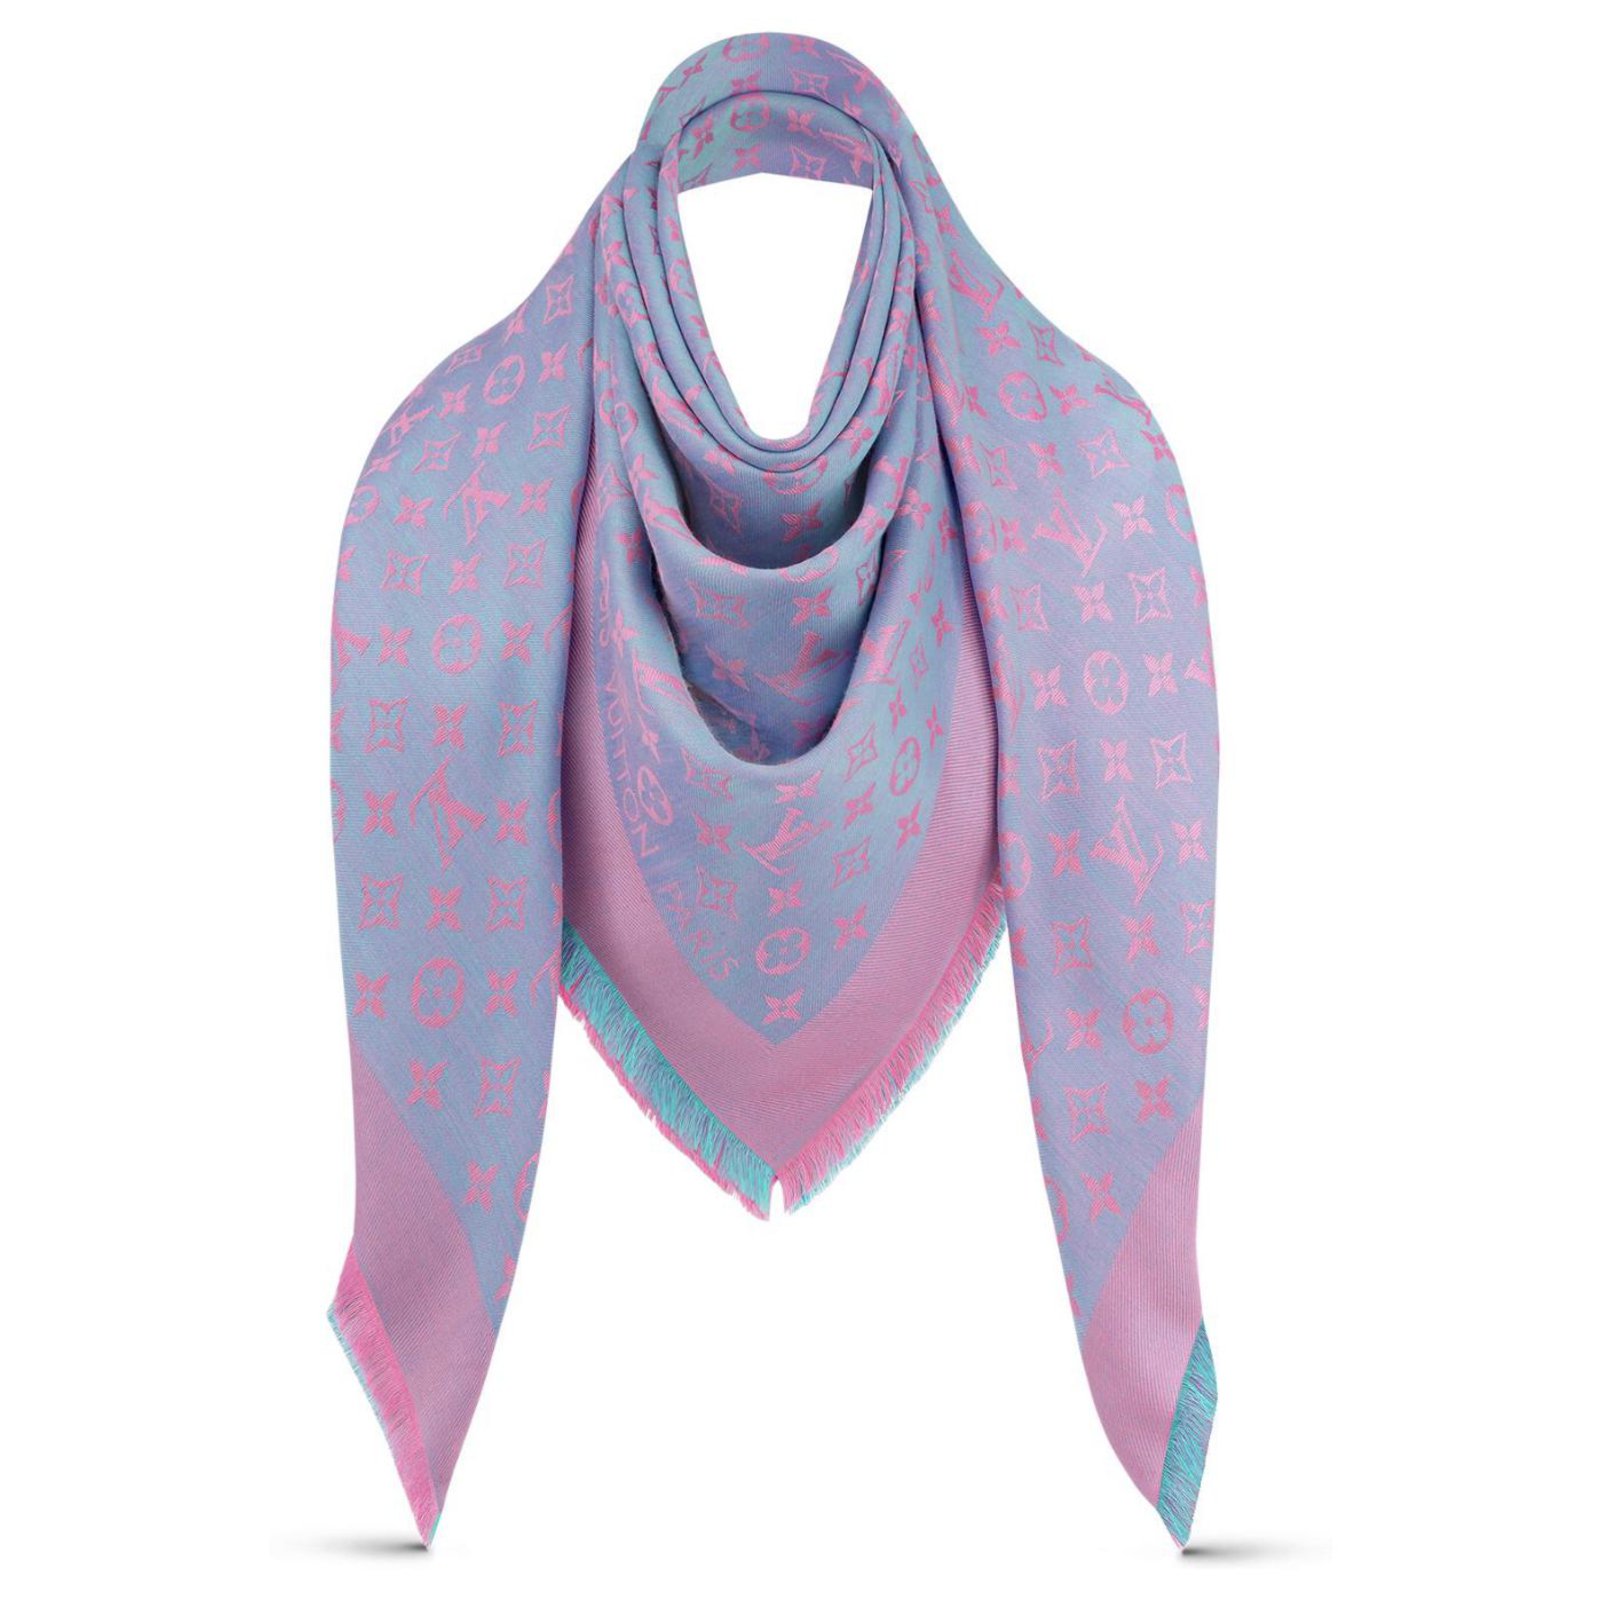 LOUIS VUITTON Patterned silk scarf in shades of blue, re…